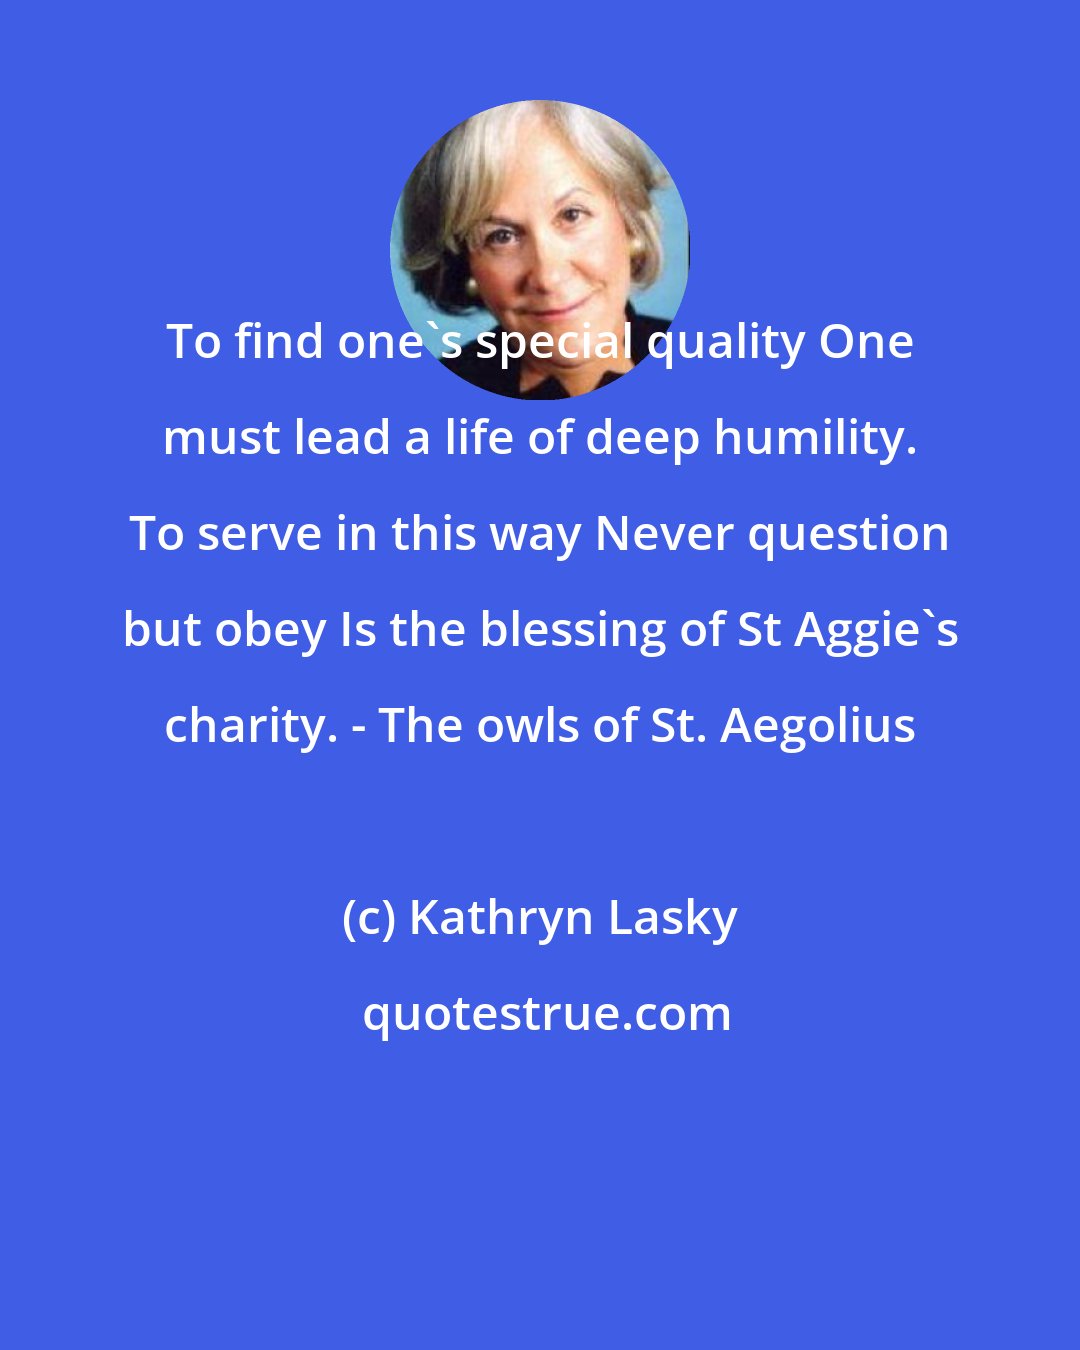 Kathryn Lasky: To find one's special quality One must lead a life of deep humility. To serve in this way Never question but obey Is the blessing of St Aggie's charity. - The owls of St. Aegolius